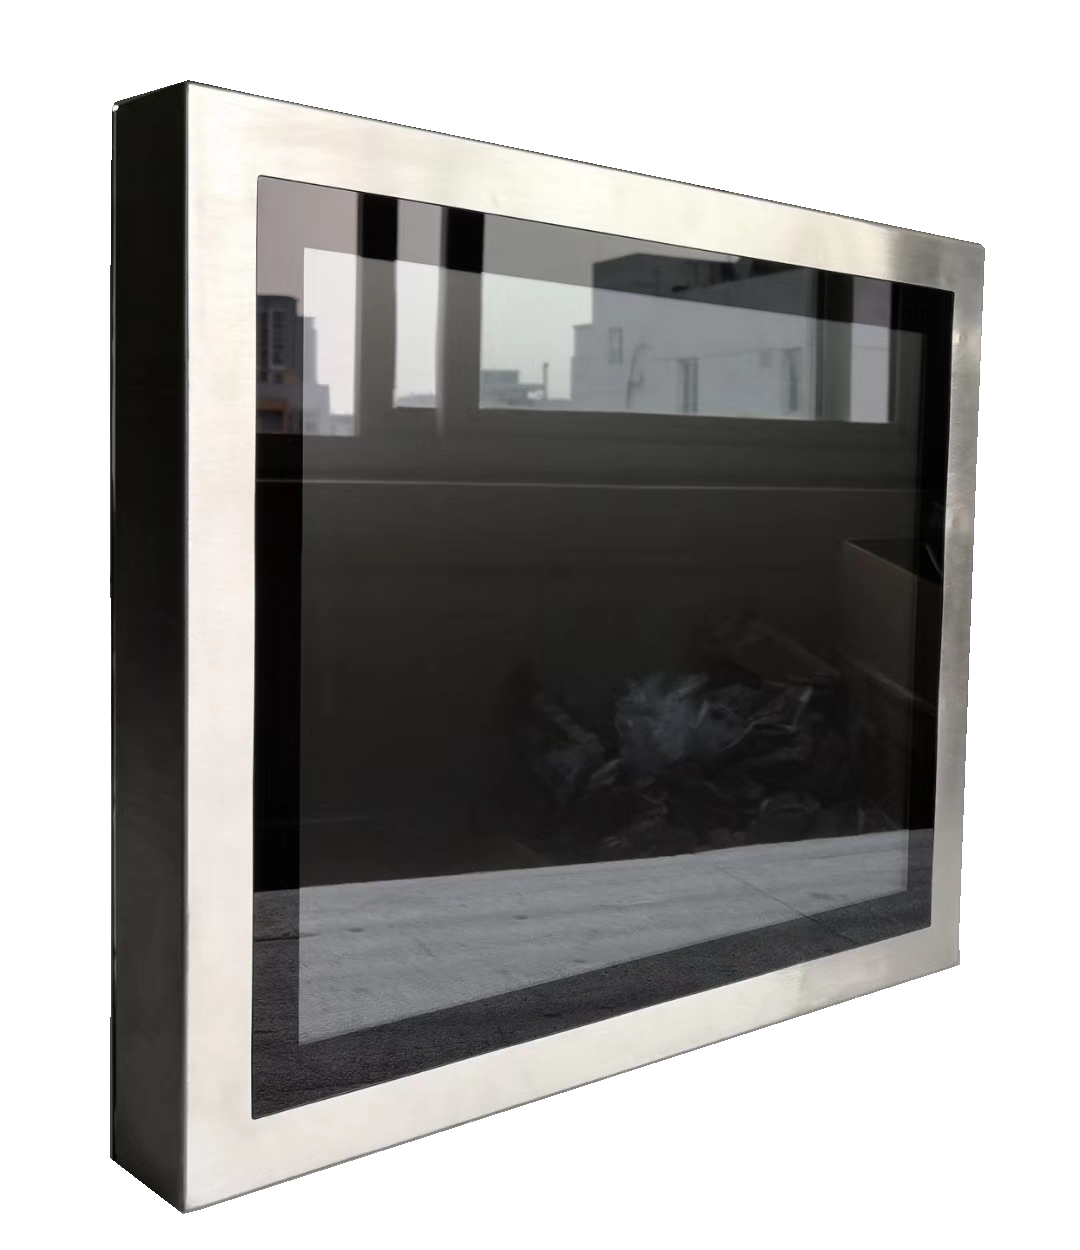 IP67 stainless steel panel PC